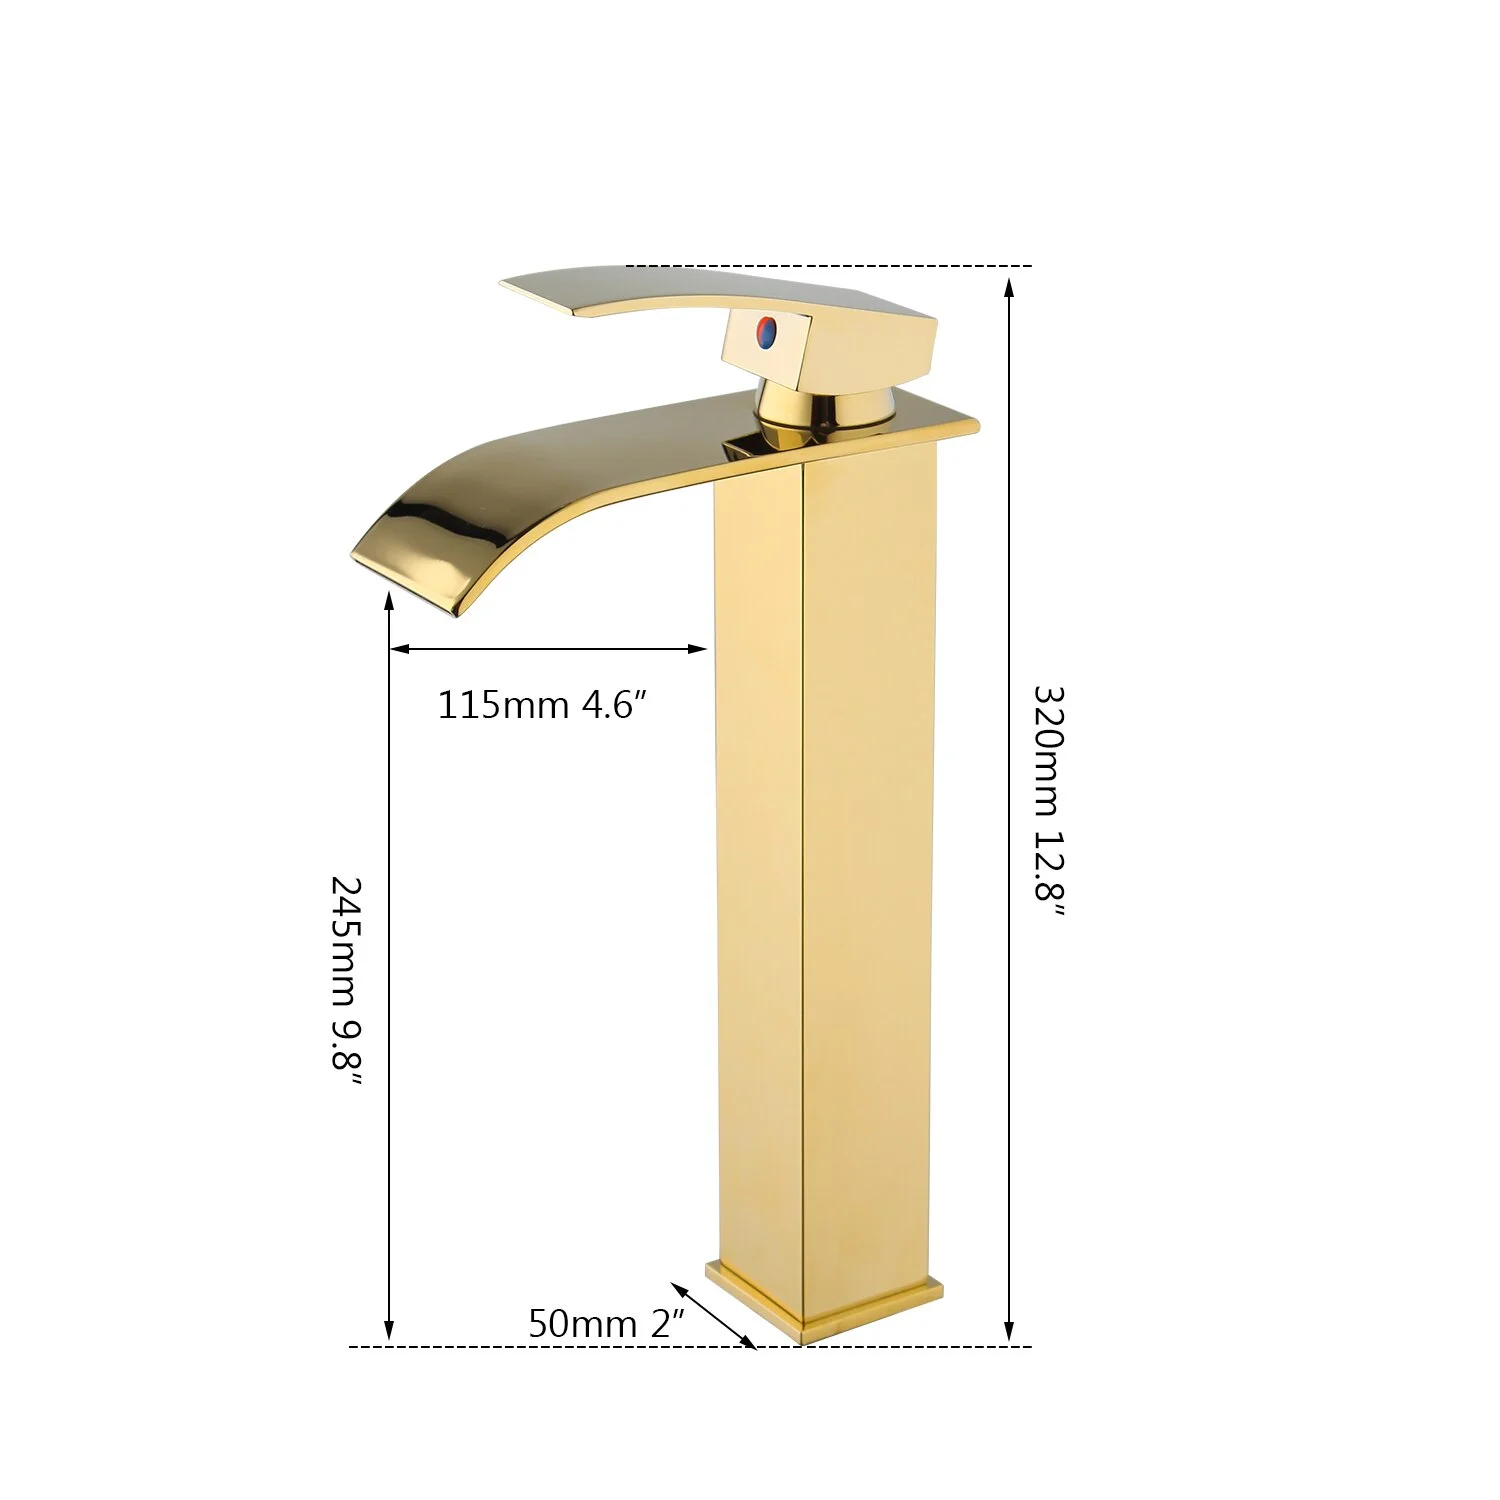 Angular Gold Waterfall Bathroom Faucet  -  Gold Water Taps & Faucets